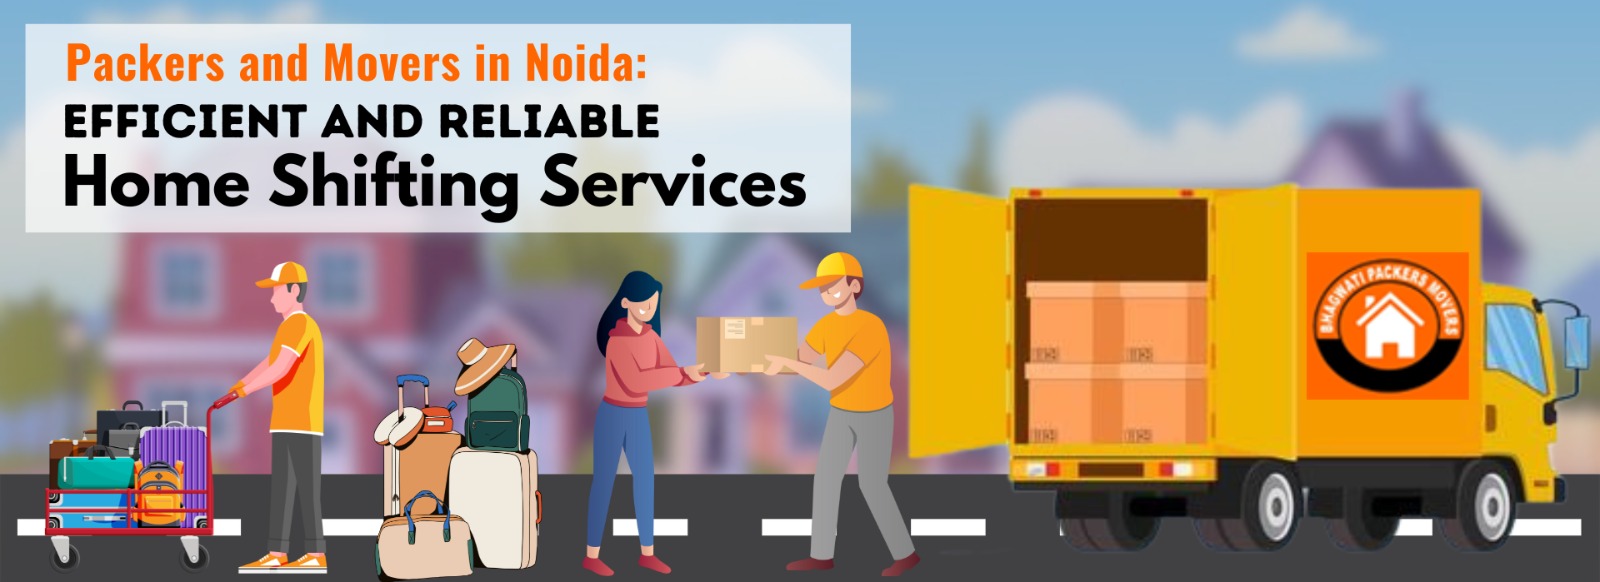 Bhagwati Packers and Movers in Noida | Best Movers and Packers in  Noida Extension, Greater Noida